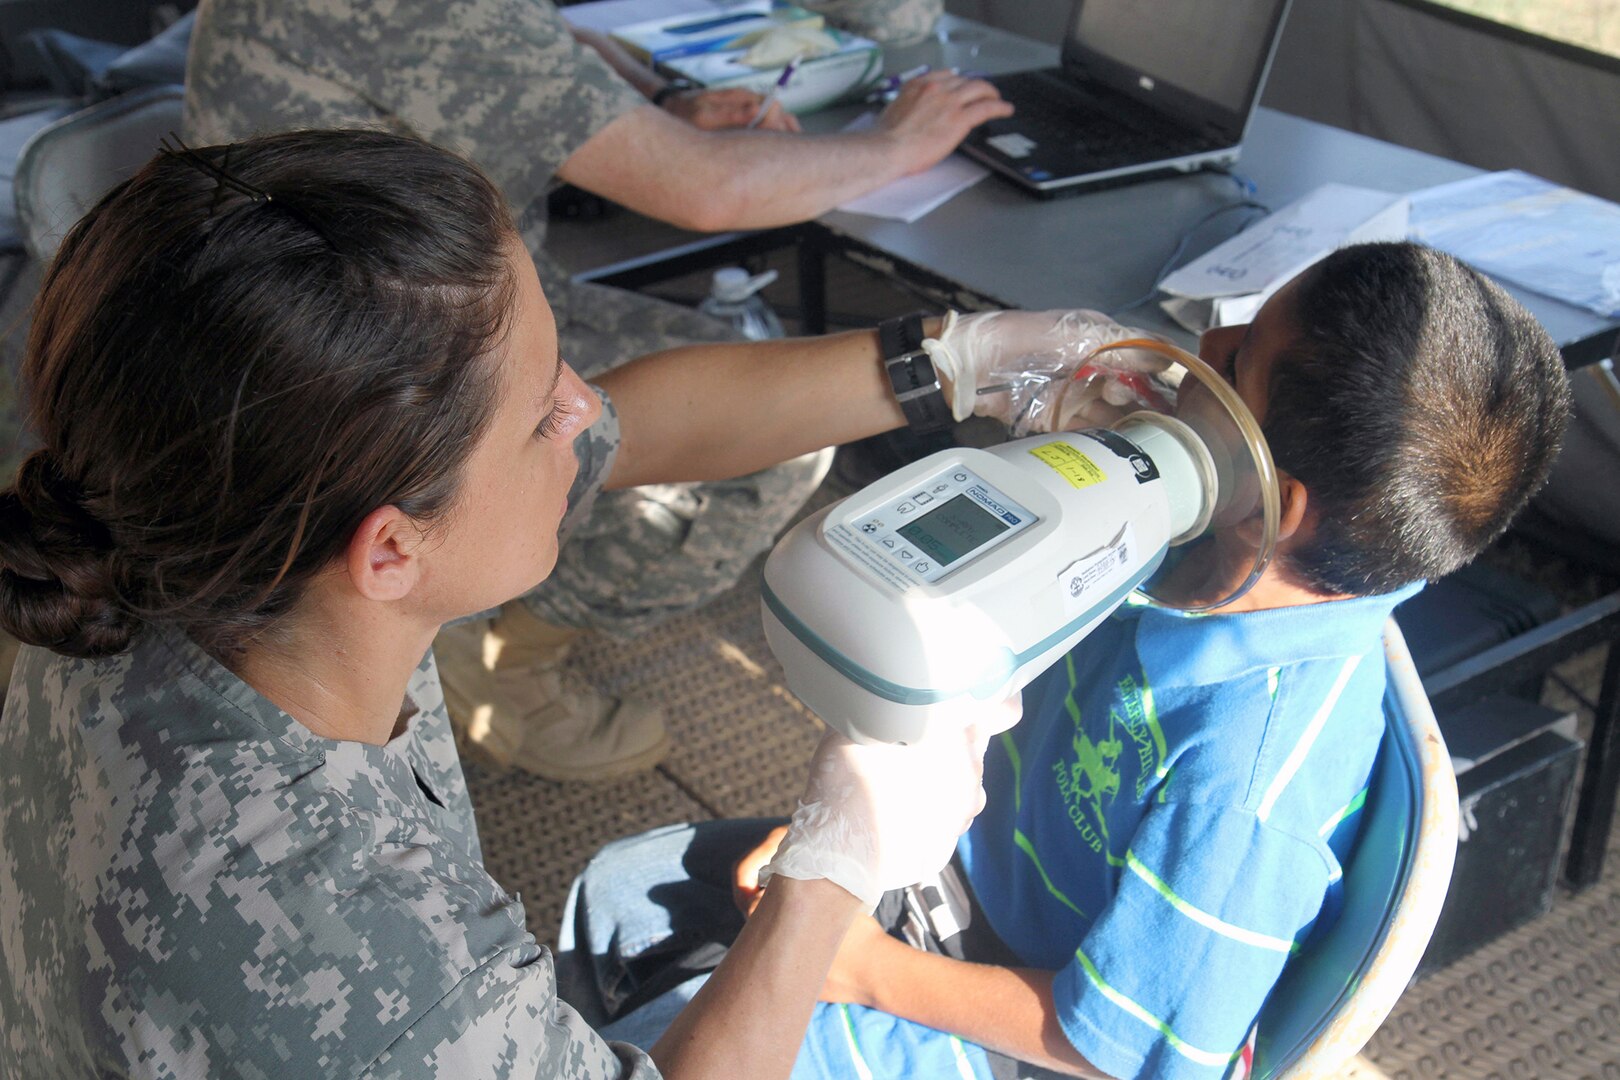 Sgt. Samantha Miller, a dental technician assigned to the Utah National Guard Medical Command, takes dental x-rays of a young patient April 9, 2017, during a free medical event held in Ladyville, Belize as a part of Beyond the Horizon 2017.  BTH 2017 is an on-going partnership exercise between the Government of Belize and U.S. Southern Command that will provide three free medical service events and five construction projects throughout the country of Belize from March 25 until June 17. (U.S. Army Photo by Staff Sgt. Fredrick Varney, 131st Mobile Public Affairs Detachment)